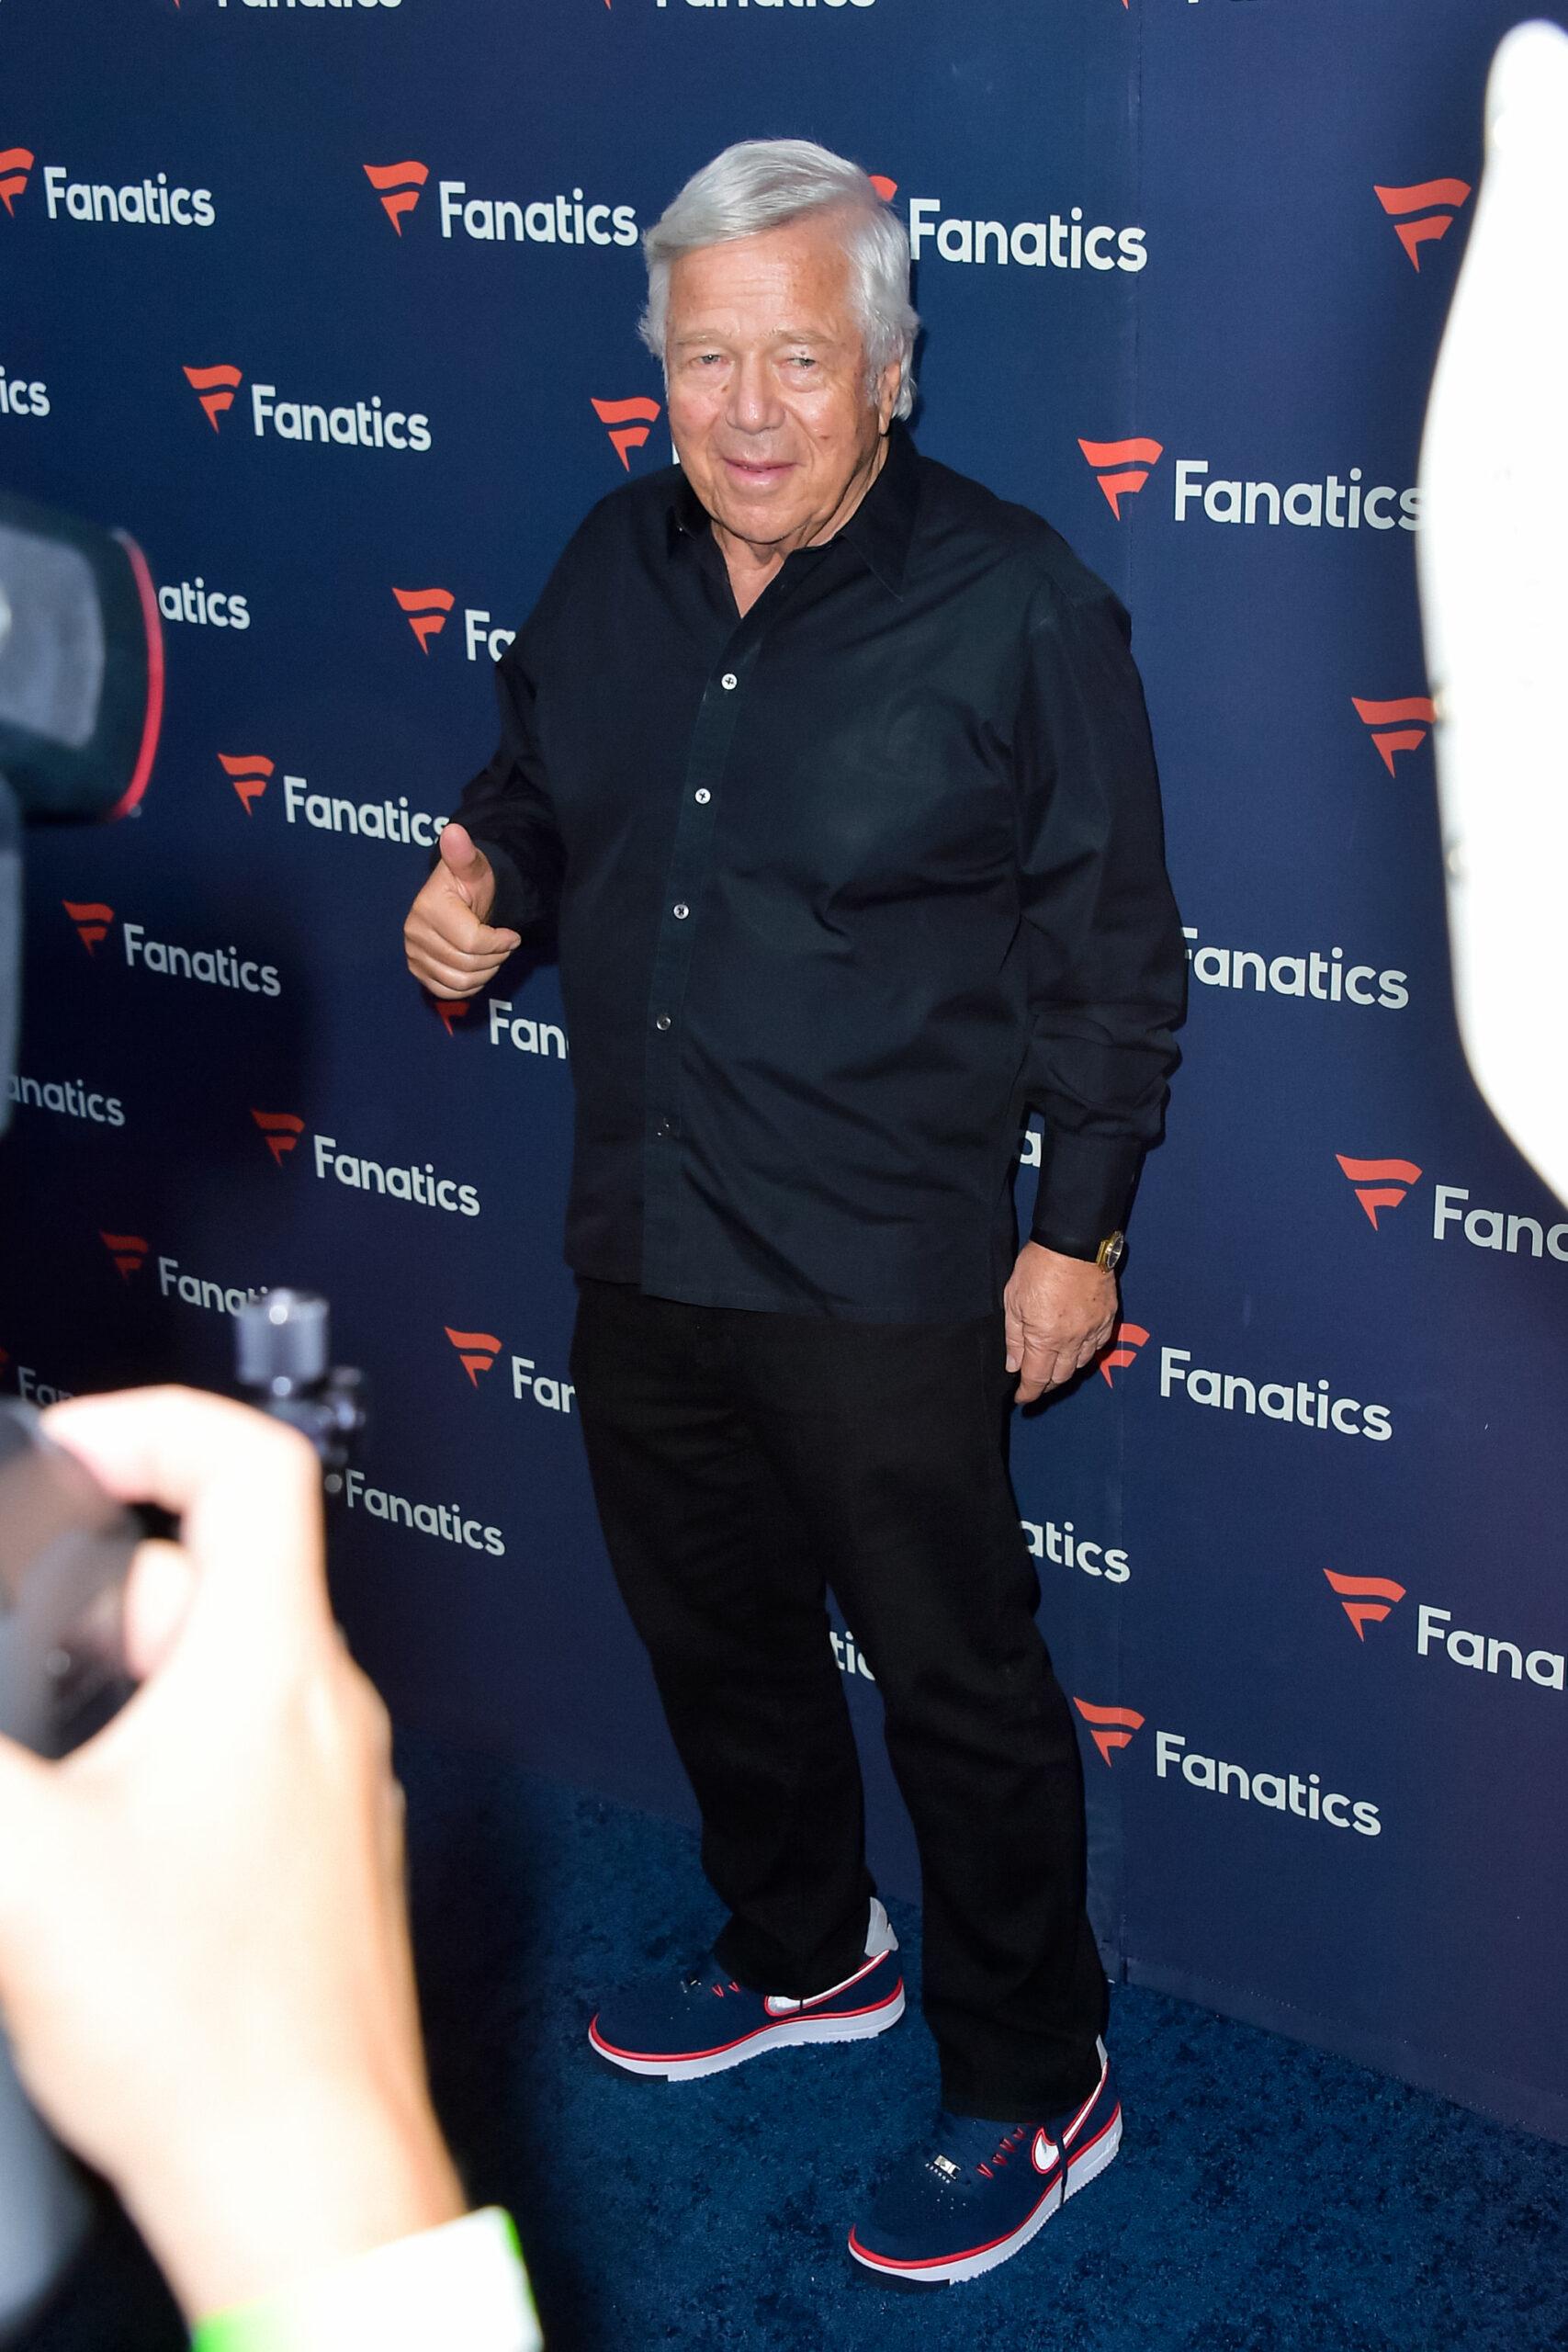 Robert Kraft attends Fanatics Superbowl Party at 3Labs in Culver City